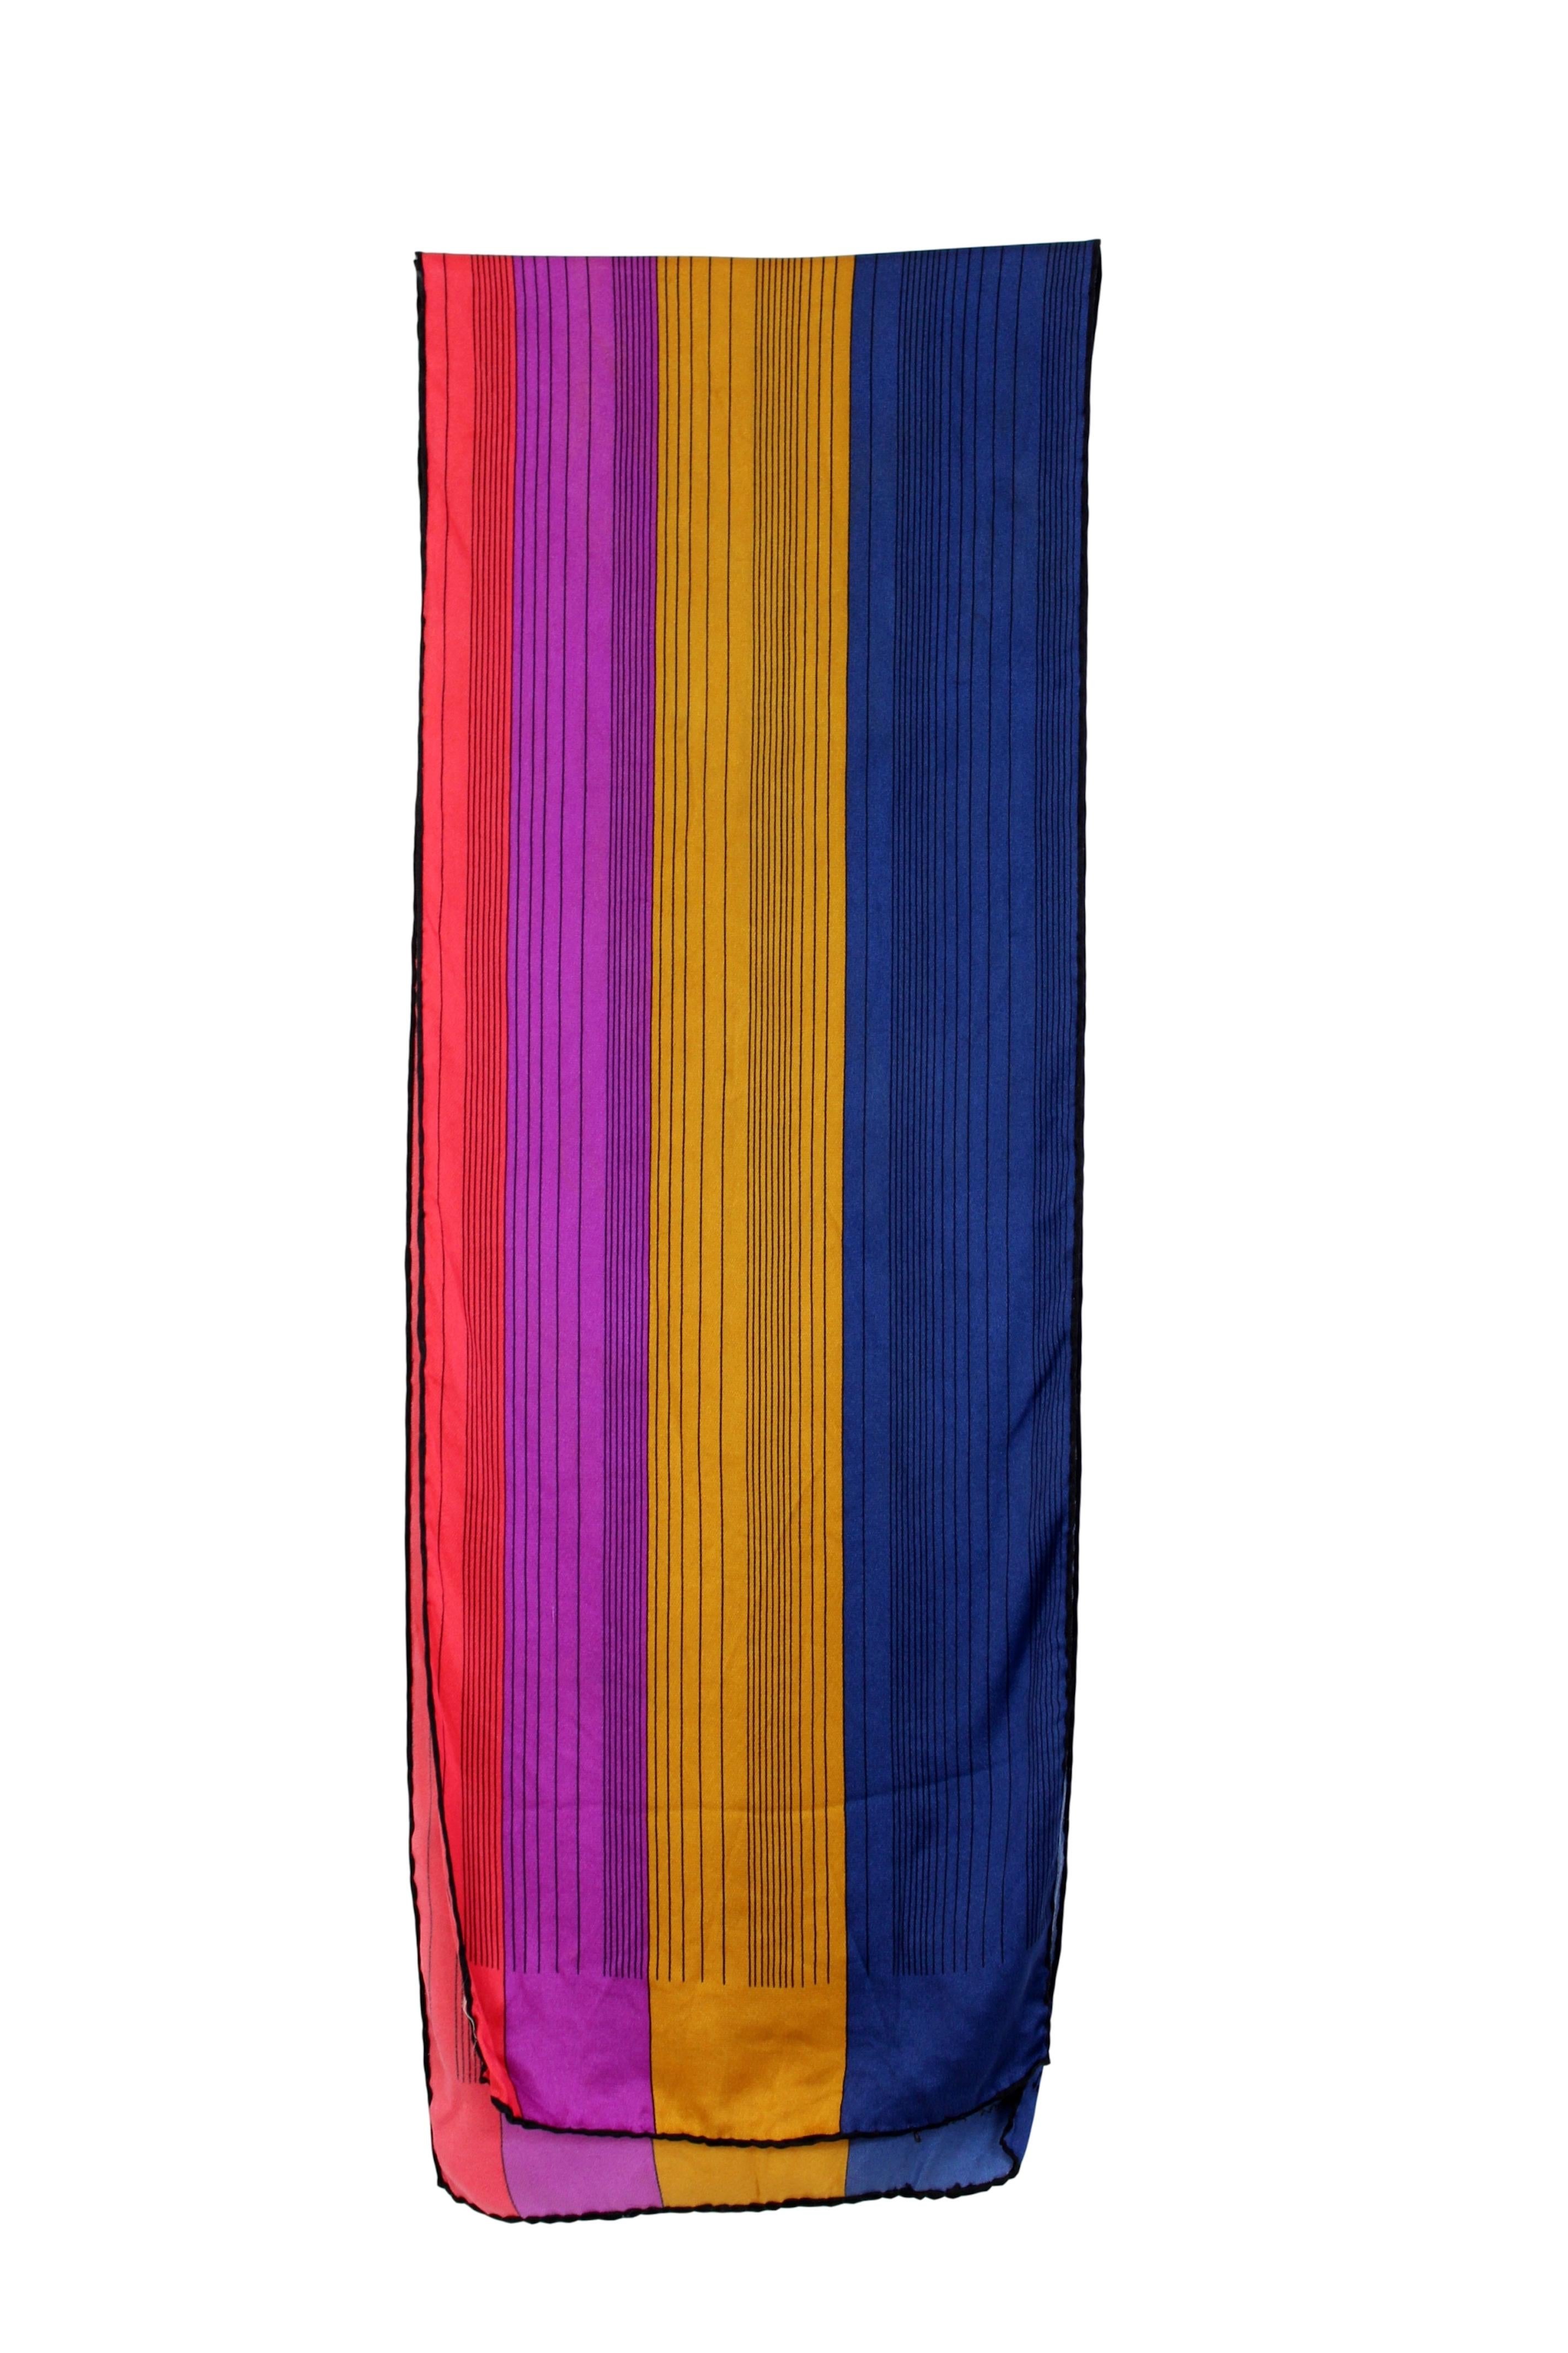 Salvatore Ferragamo vintage 90s foulard. Large stole with colored stripes, red, fuchsia and blue. Silk fabric. Made in Italy. Excellent vintage conditions.

Measures: 145 x 27 cm